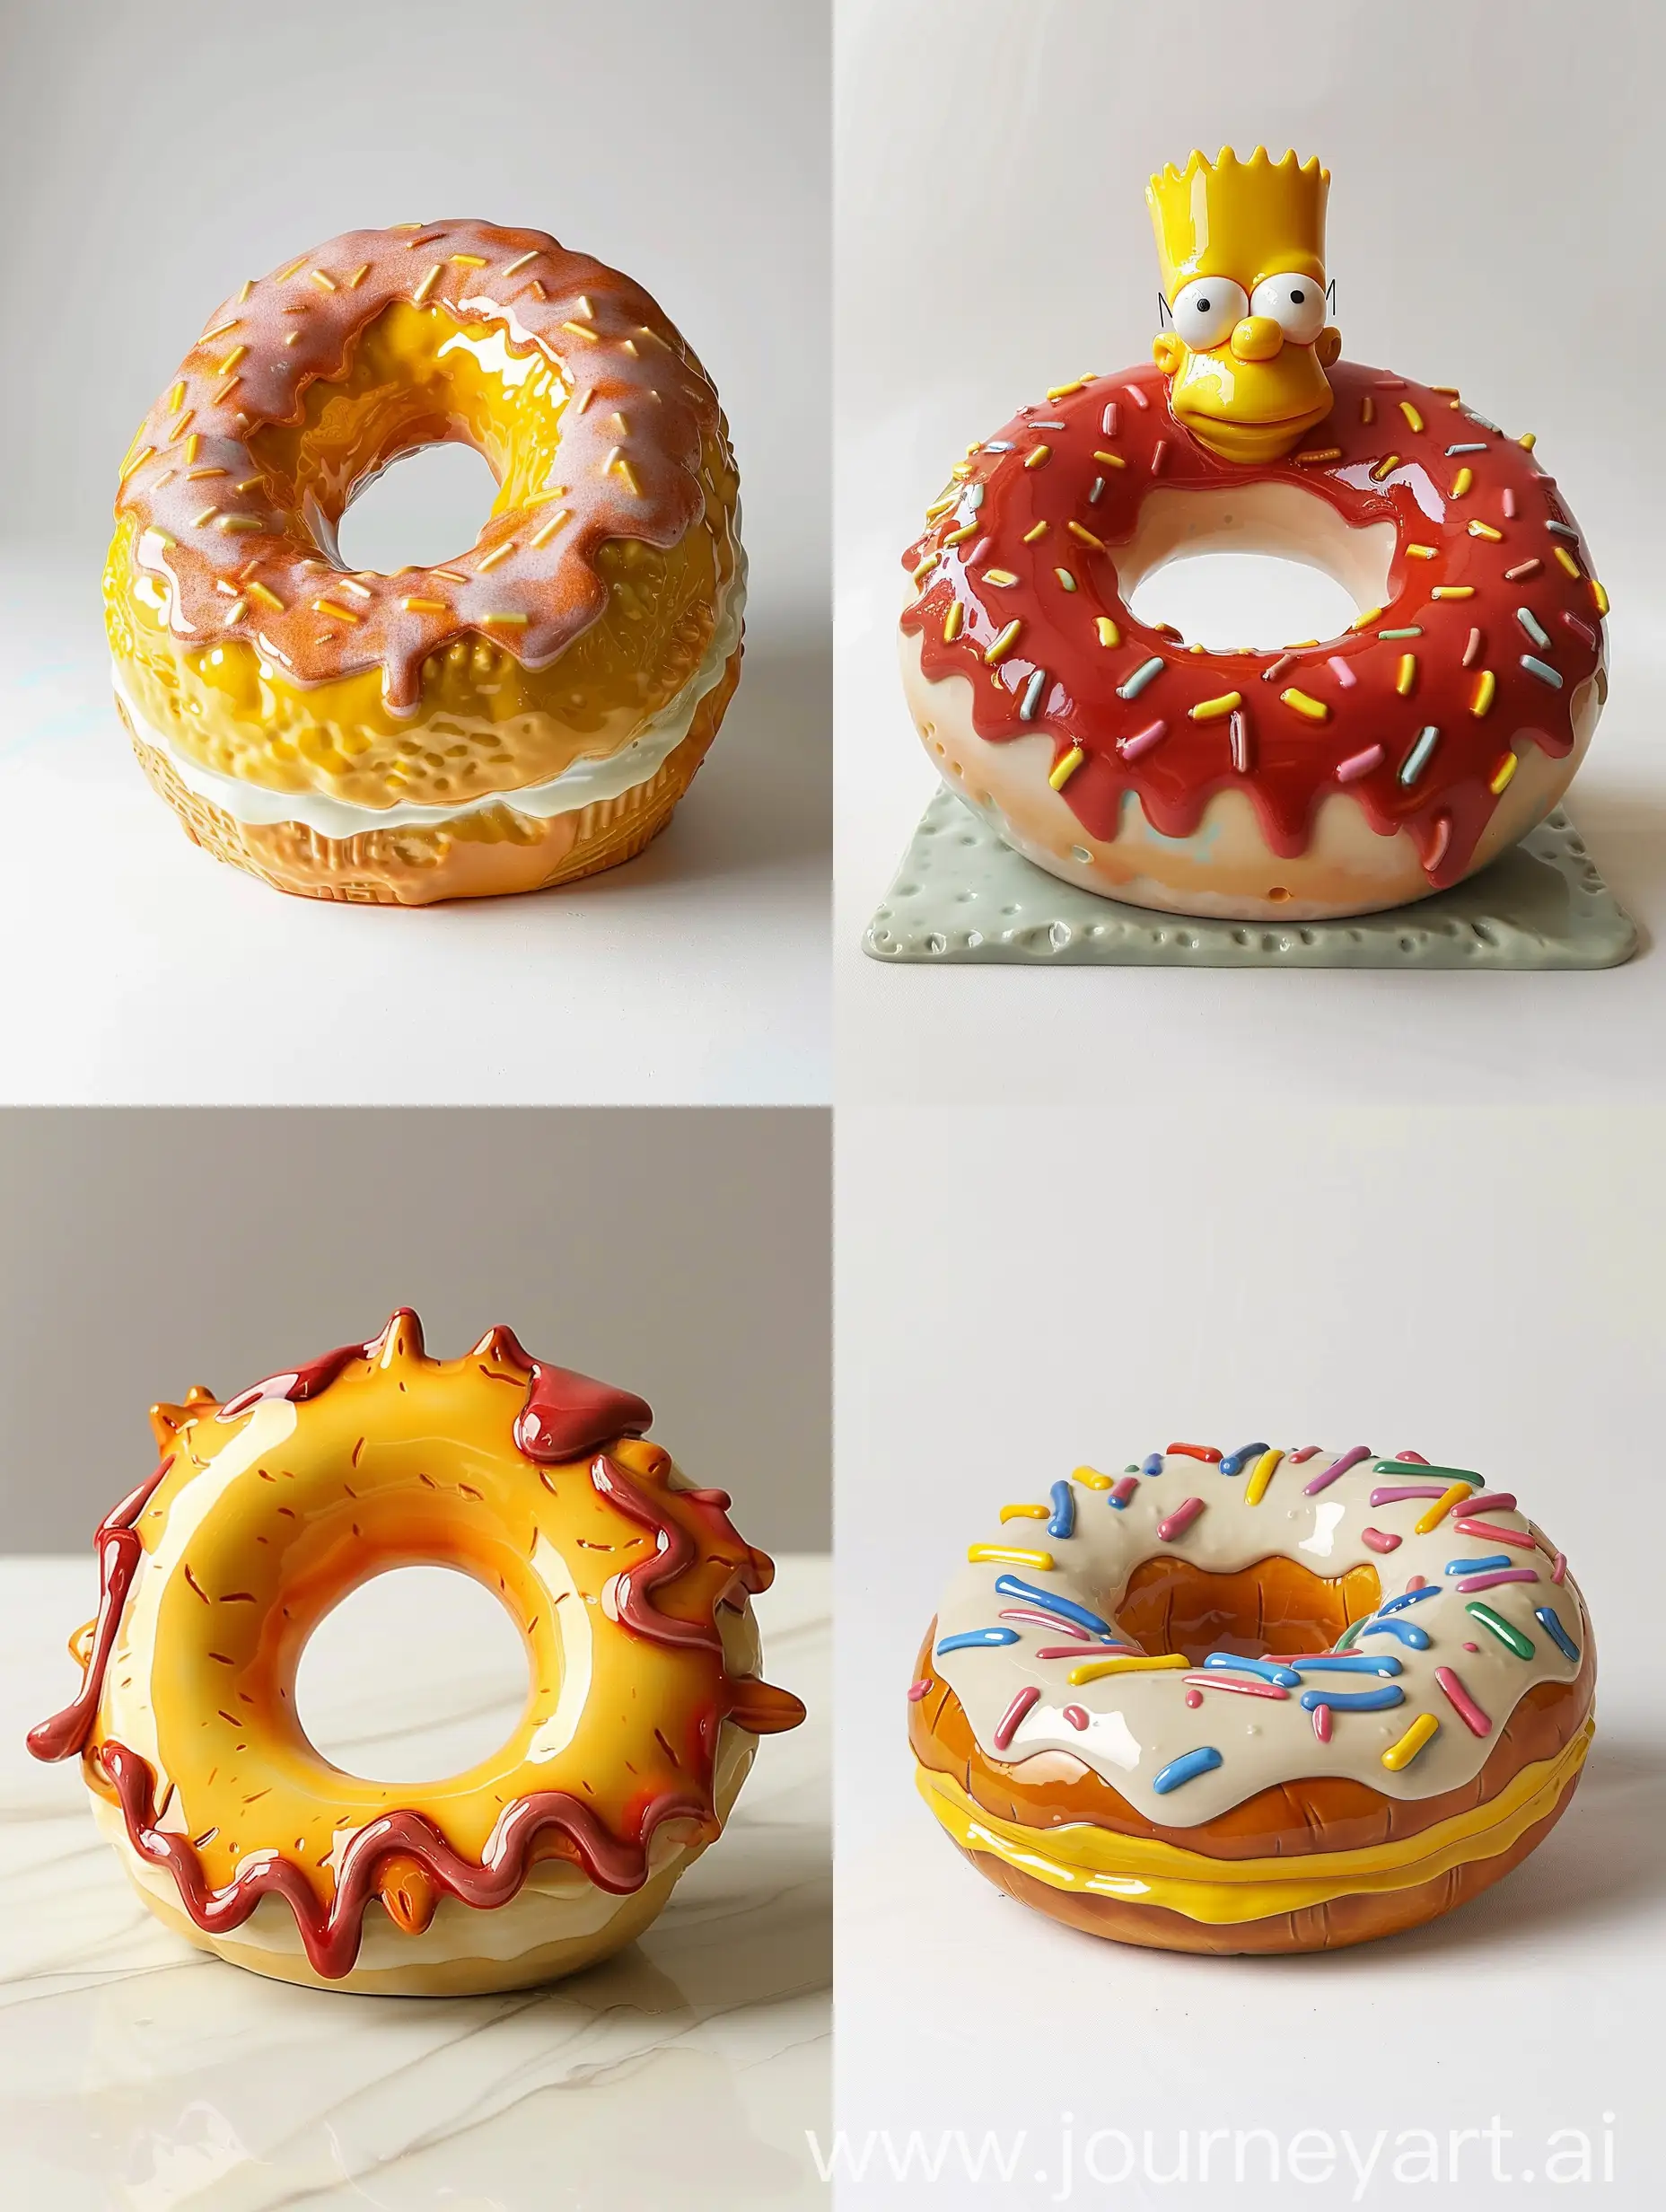 3D-Simpsons-Donut-Sculpture-Crafted-from-SatsumaStyle-Porcelain